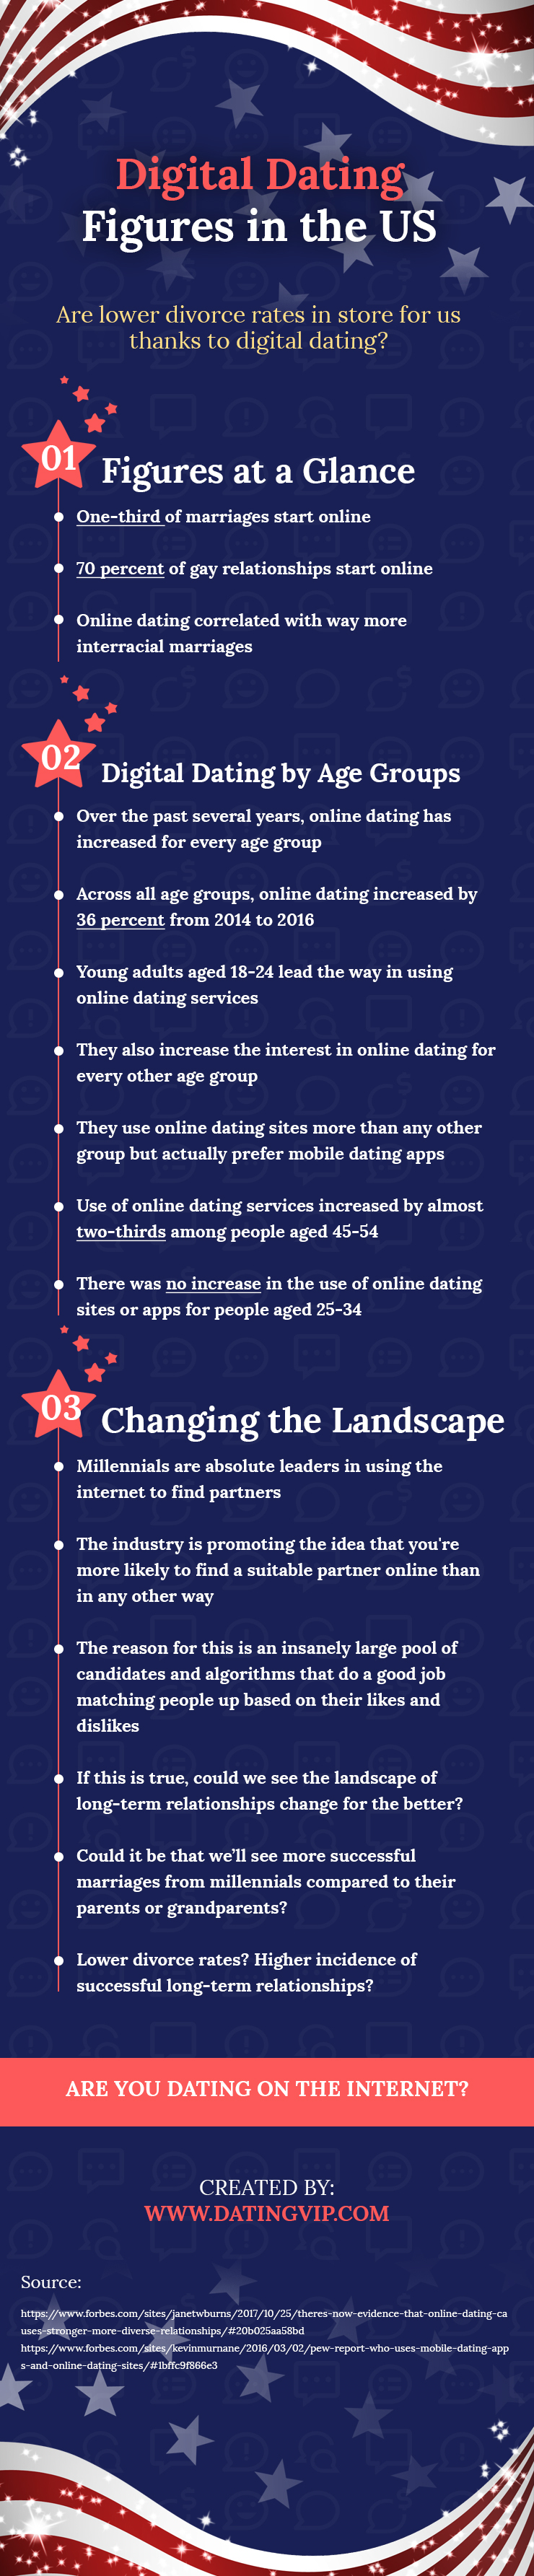 Digital Dating Figures in the US